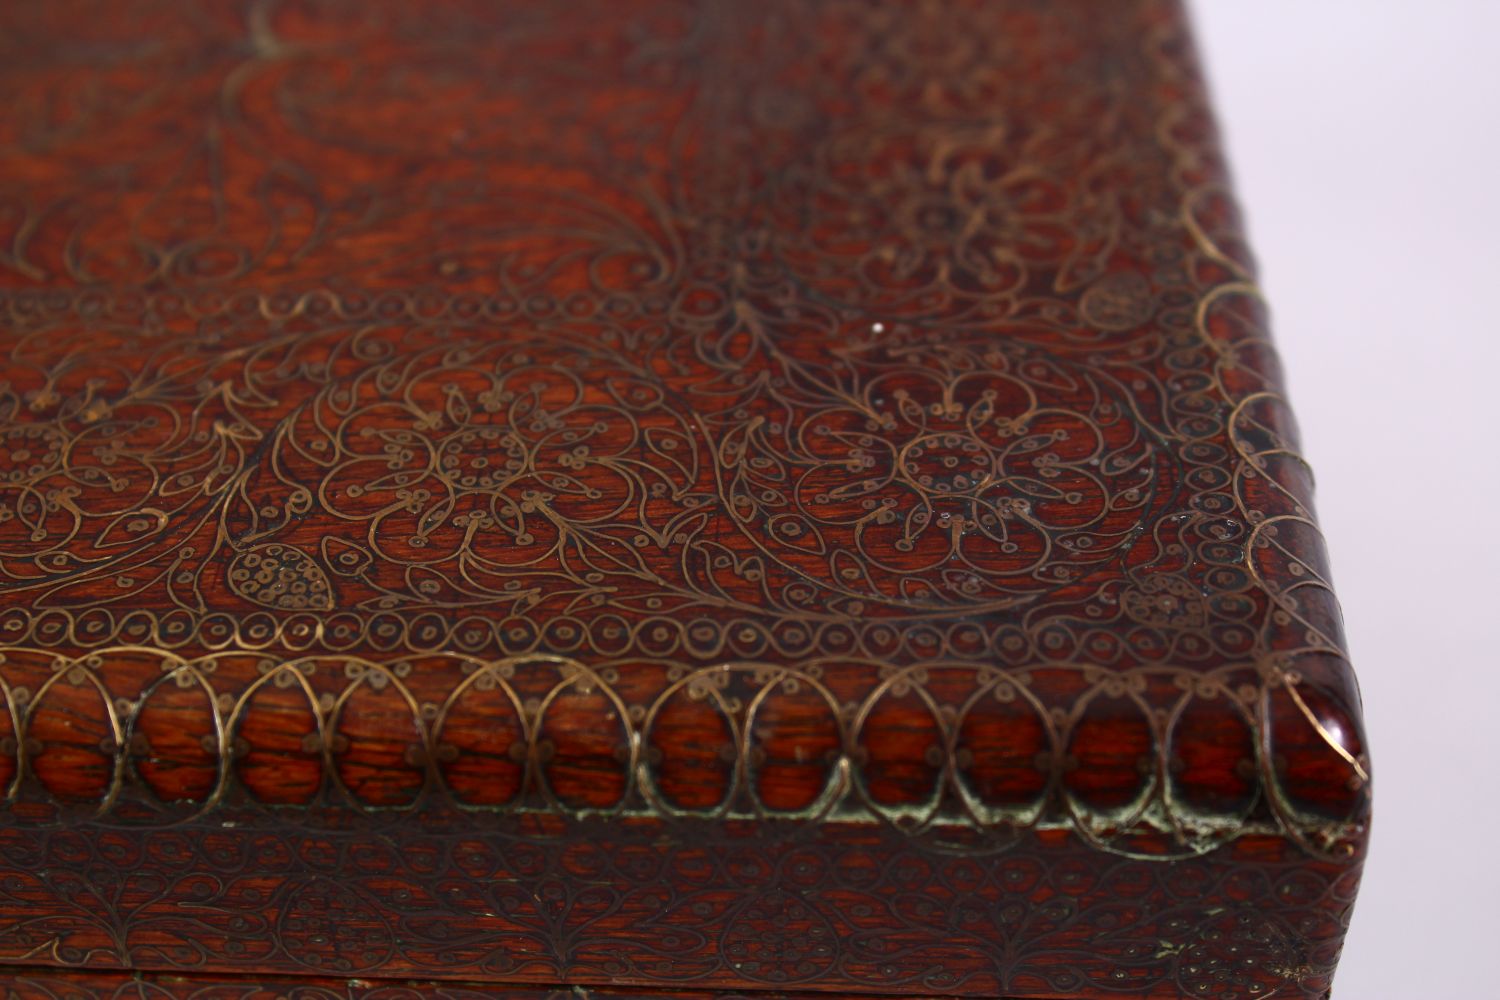 A FINE 19TH CENTURY INDO PERSIAN SILVER AND BRASS INLAID WOODEN BOX, with inlaid formal scroll - Image 7 of 7